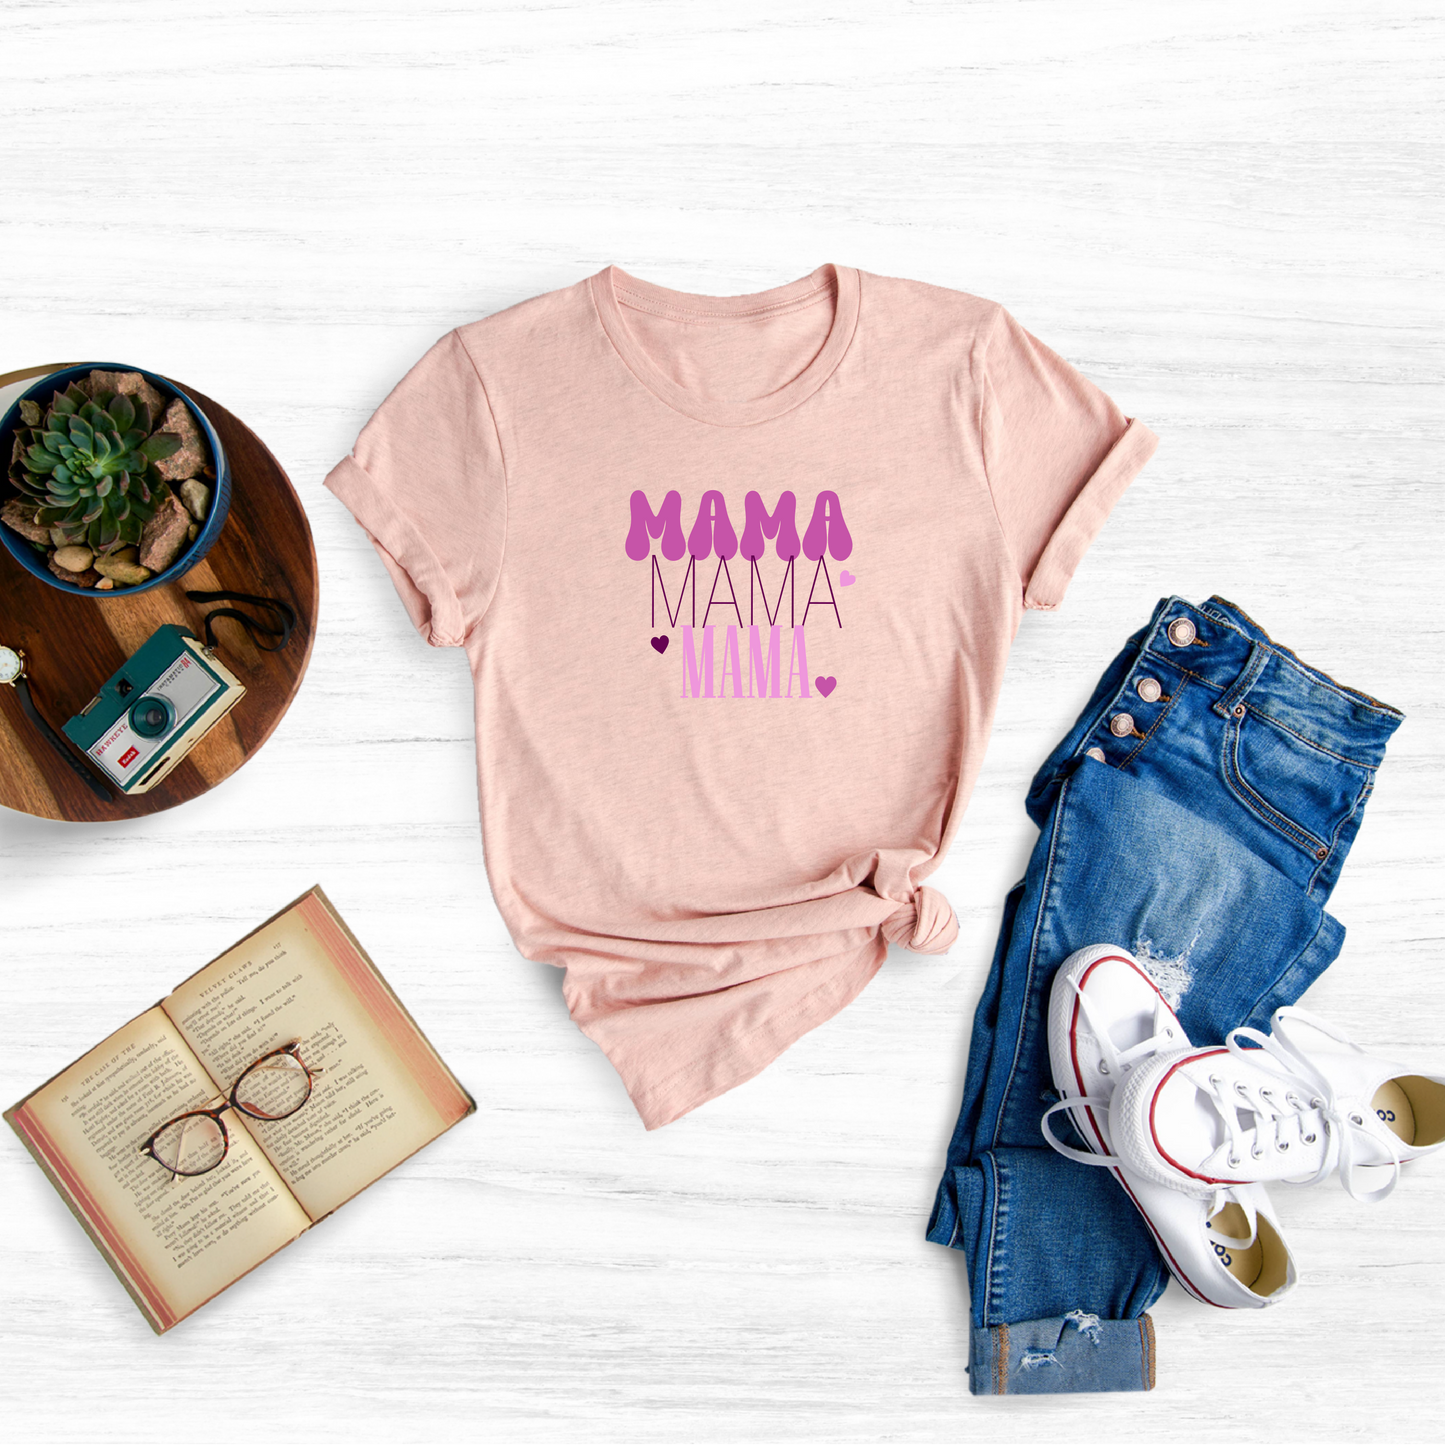 T-shirt with the word 'Mom' to convey the loving message of Mother's Day.